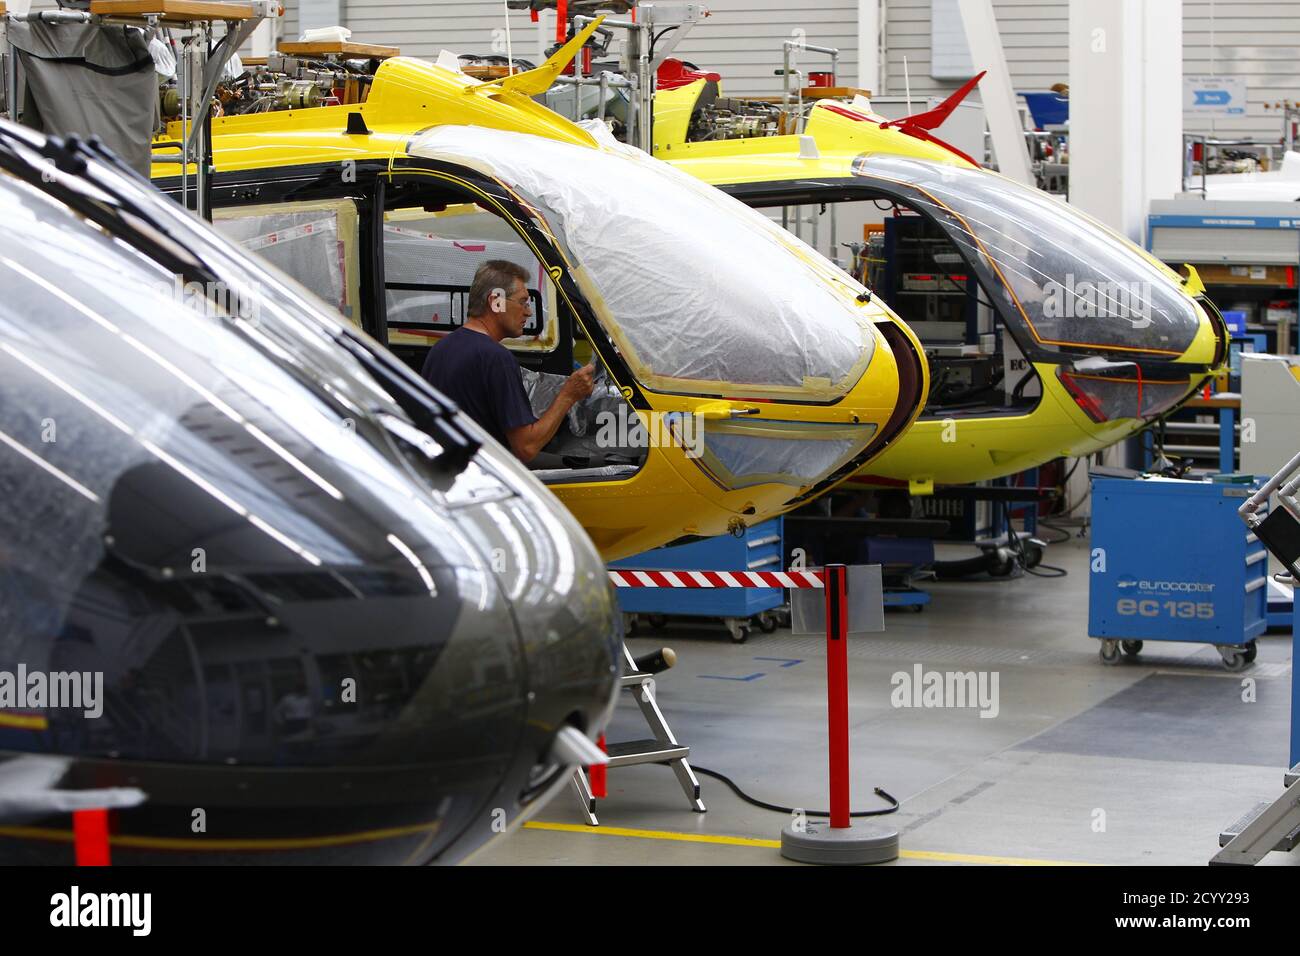 A general view of helicopters being assembled at the Airbus production  facility in Donauwoerth, Southern Germany October 9, 2014. Picture taken  October 9. REUTERS/Michaela Rehle (GERMANY - Tags: TRANSPORT BUSINESS Stock  Photo - Alamy